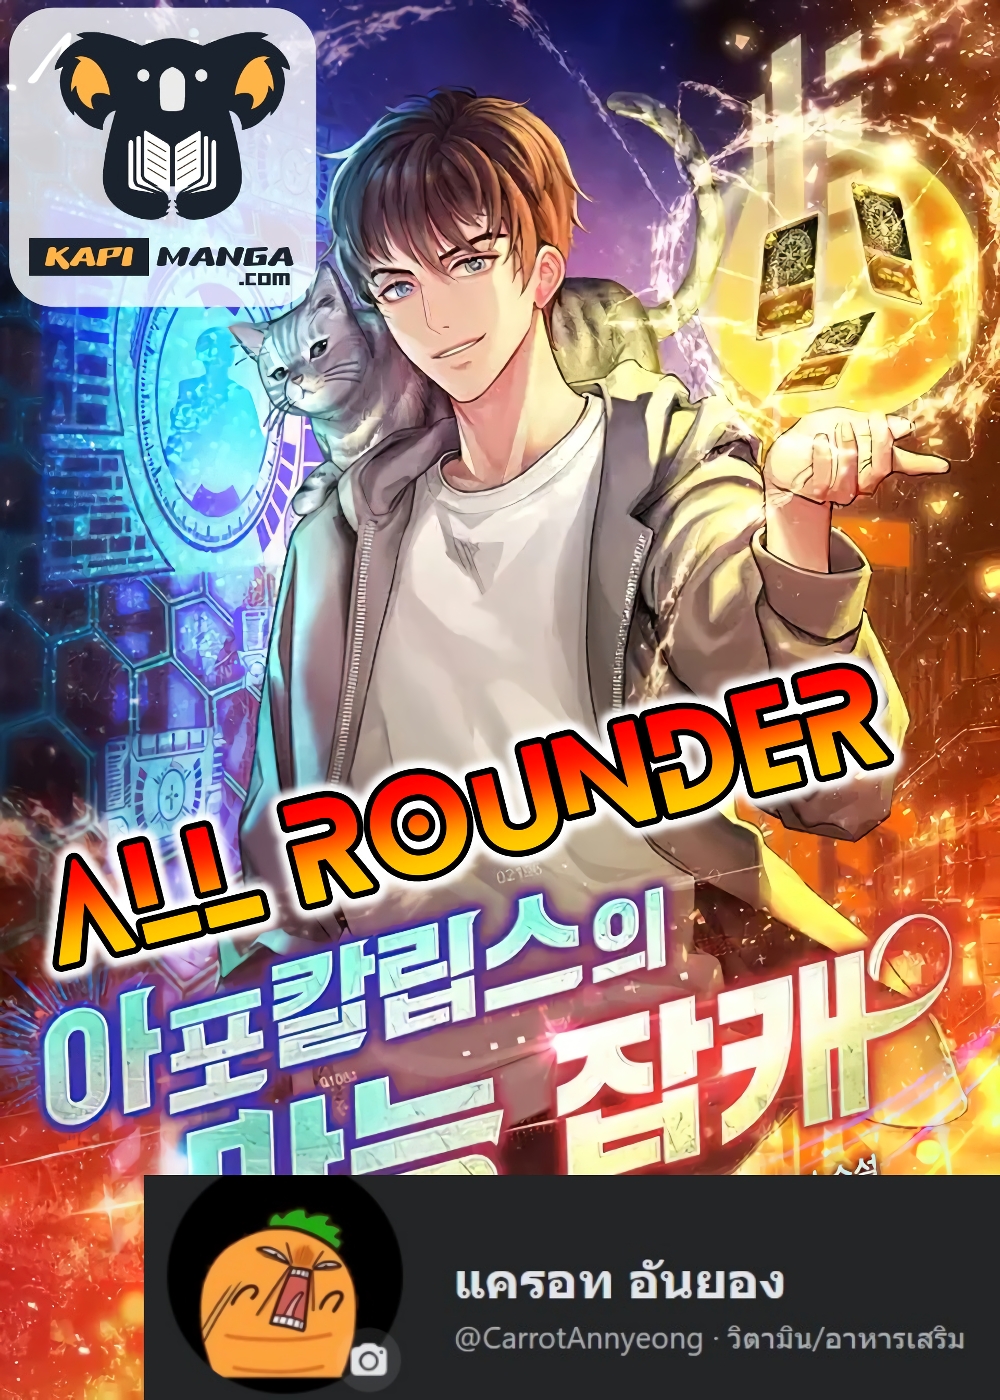 All Rounder7 (1)